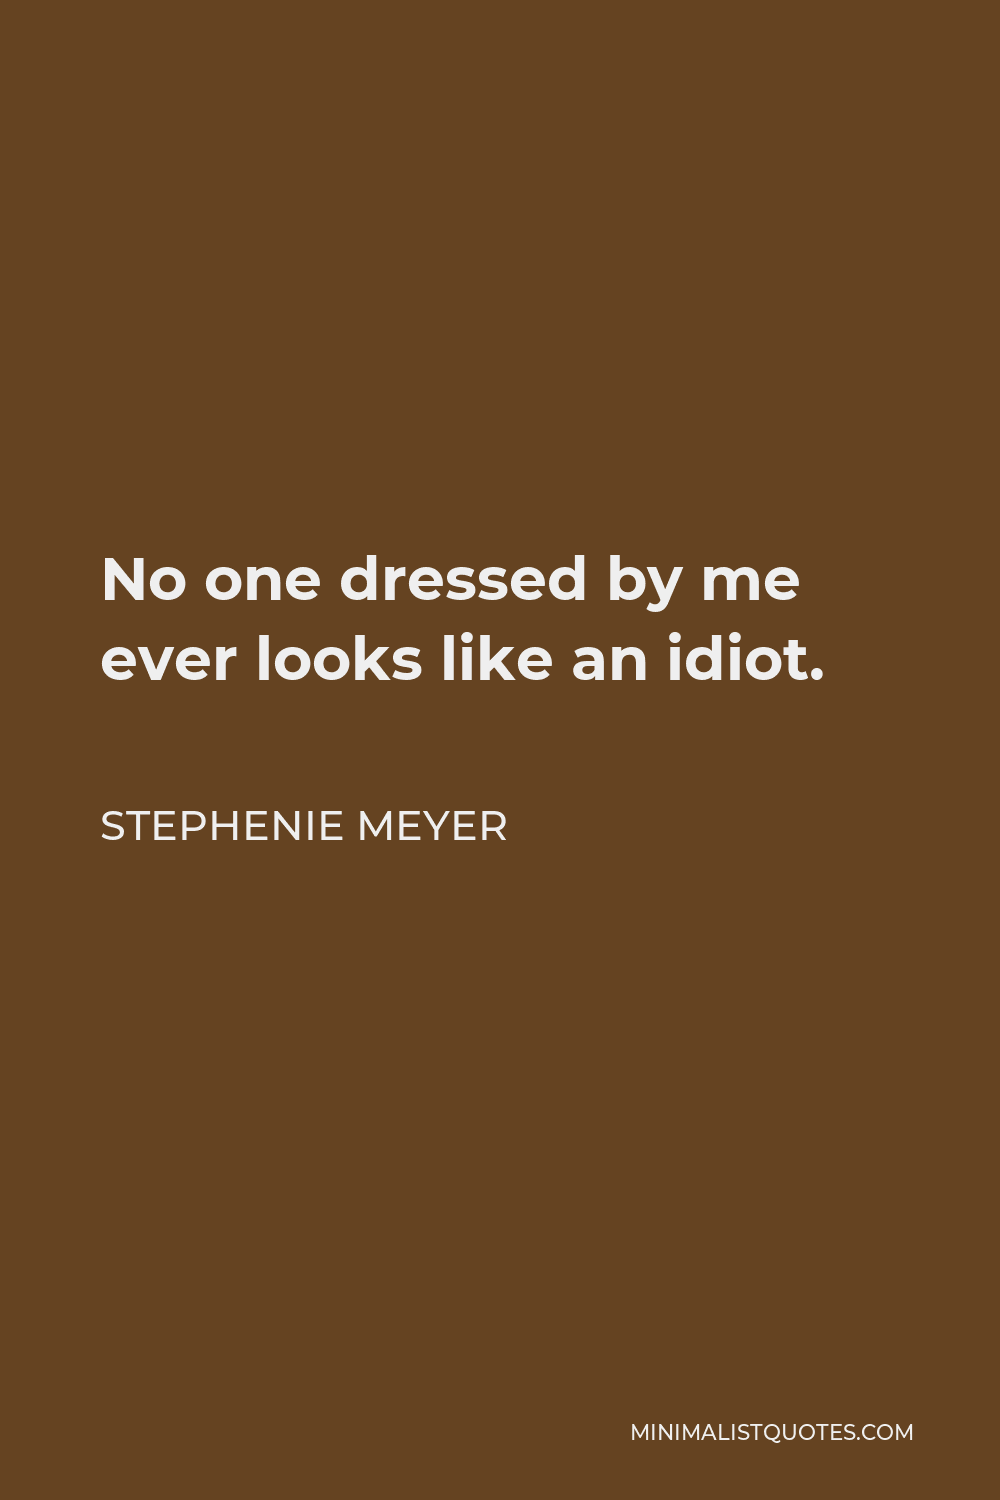 Stephenie Meyer Quote - No one dressed by me ever looks like an idiot.